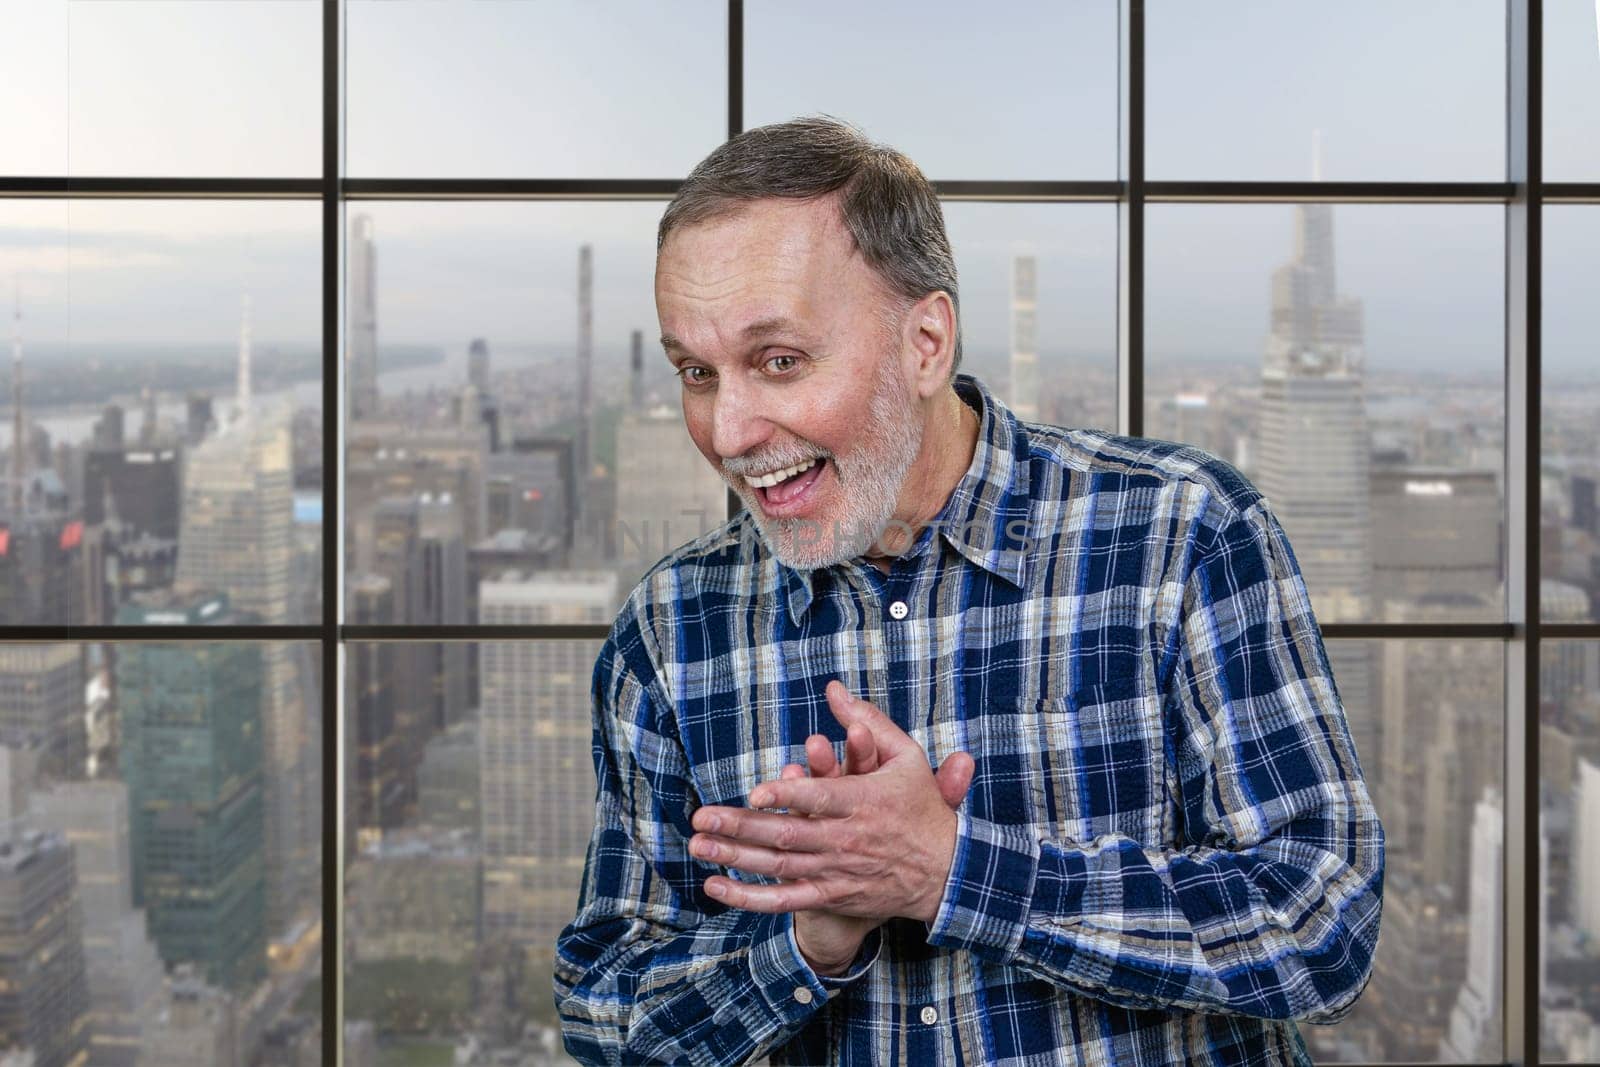 Portrait of a cheerful smiling senior businessman rubbing his hands. Windows with cityscape view background.